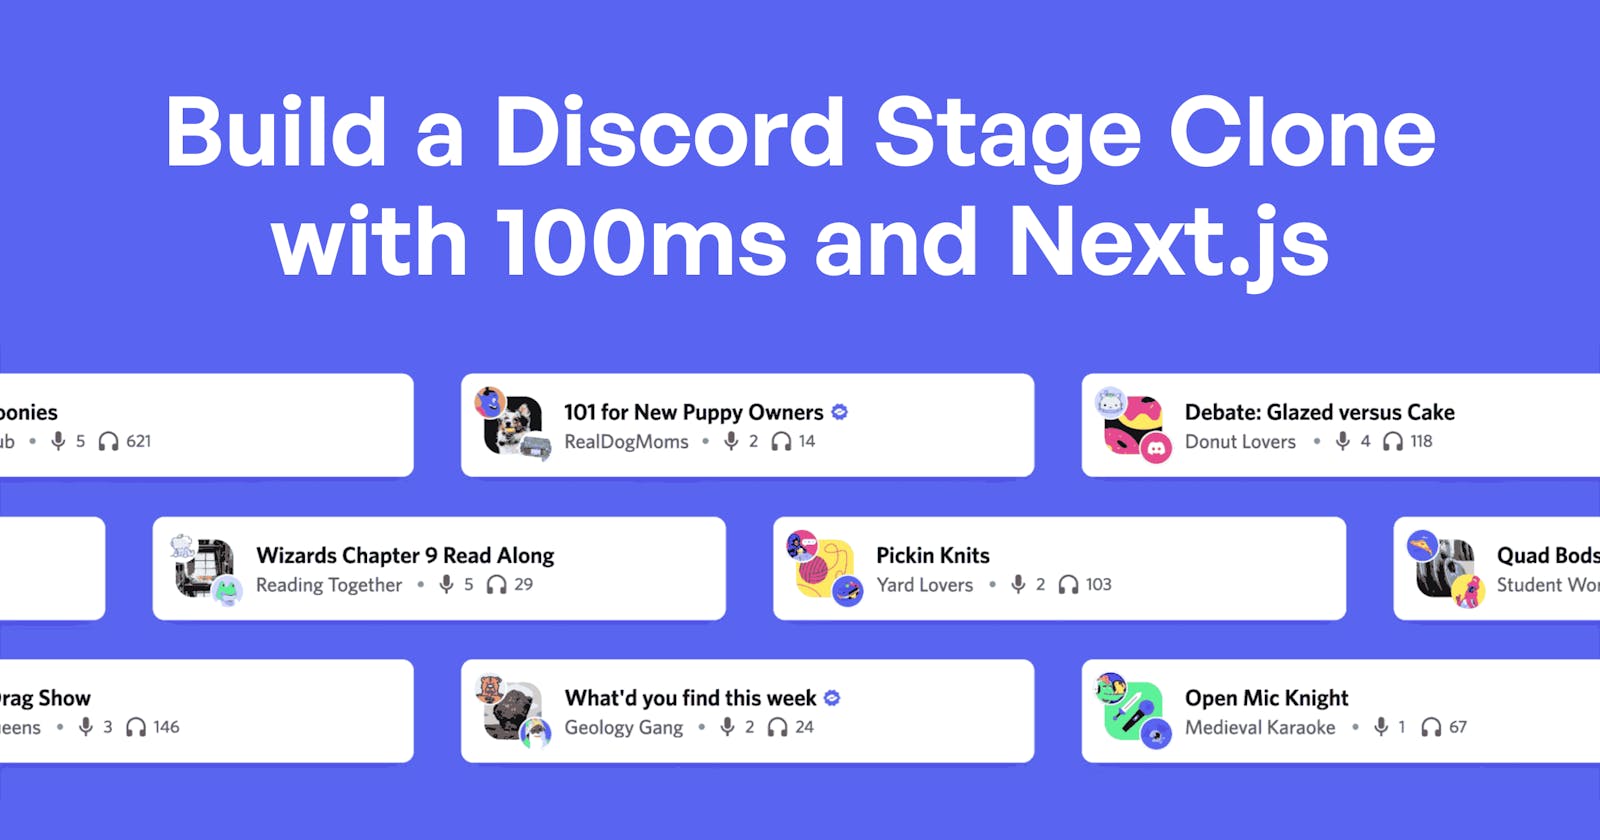 Build a Discord stage channel clone with 100ms and Next.js